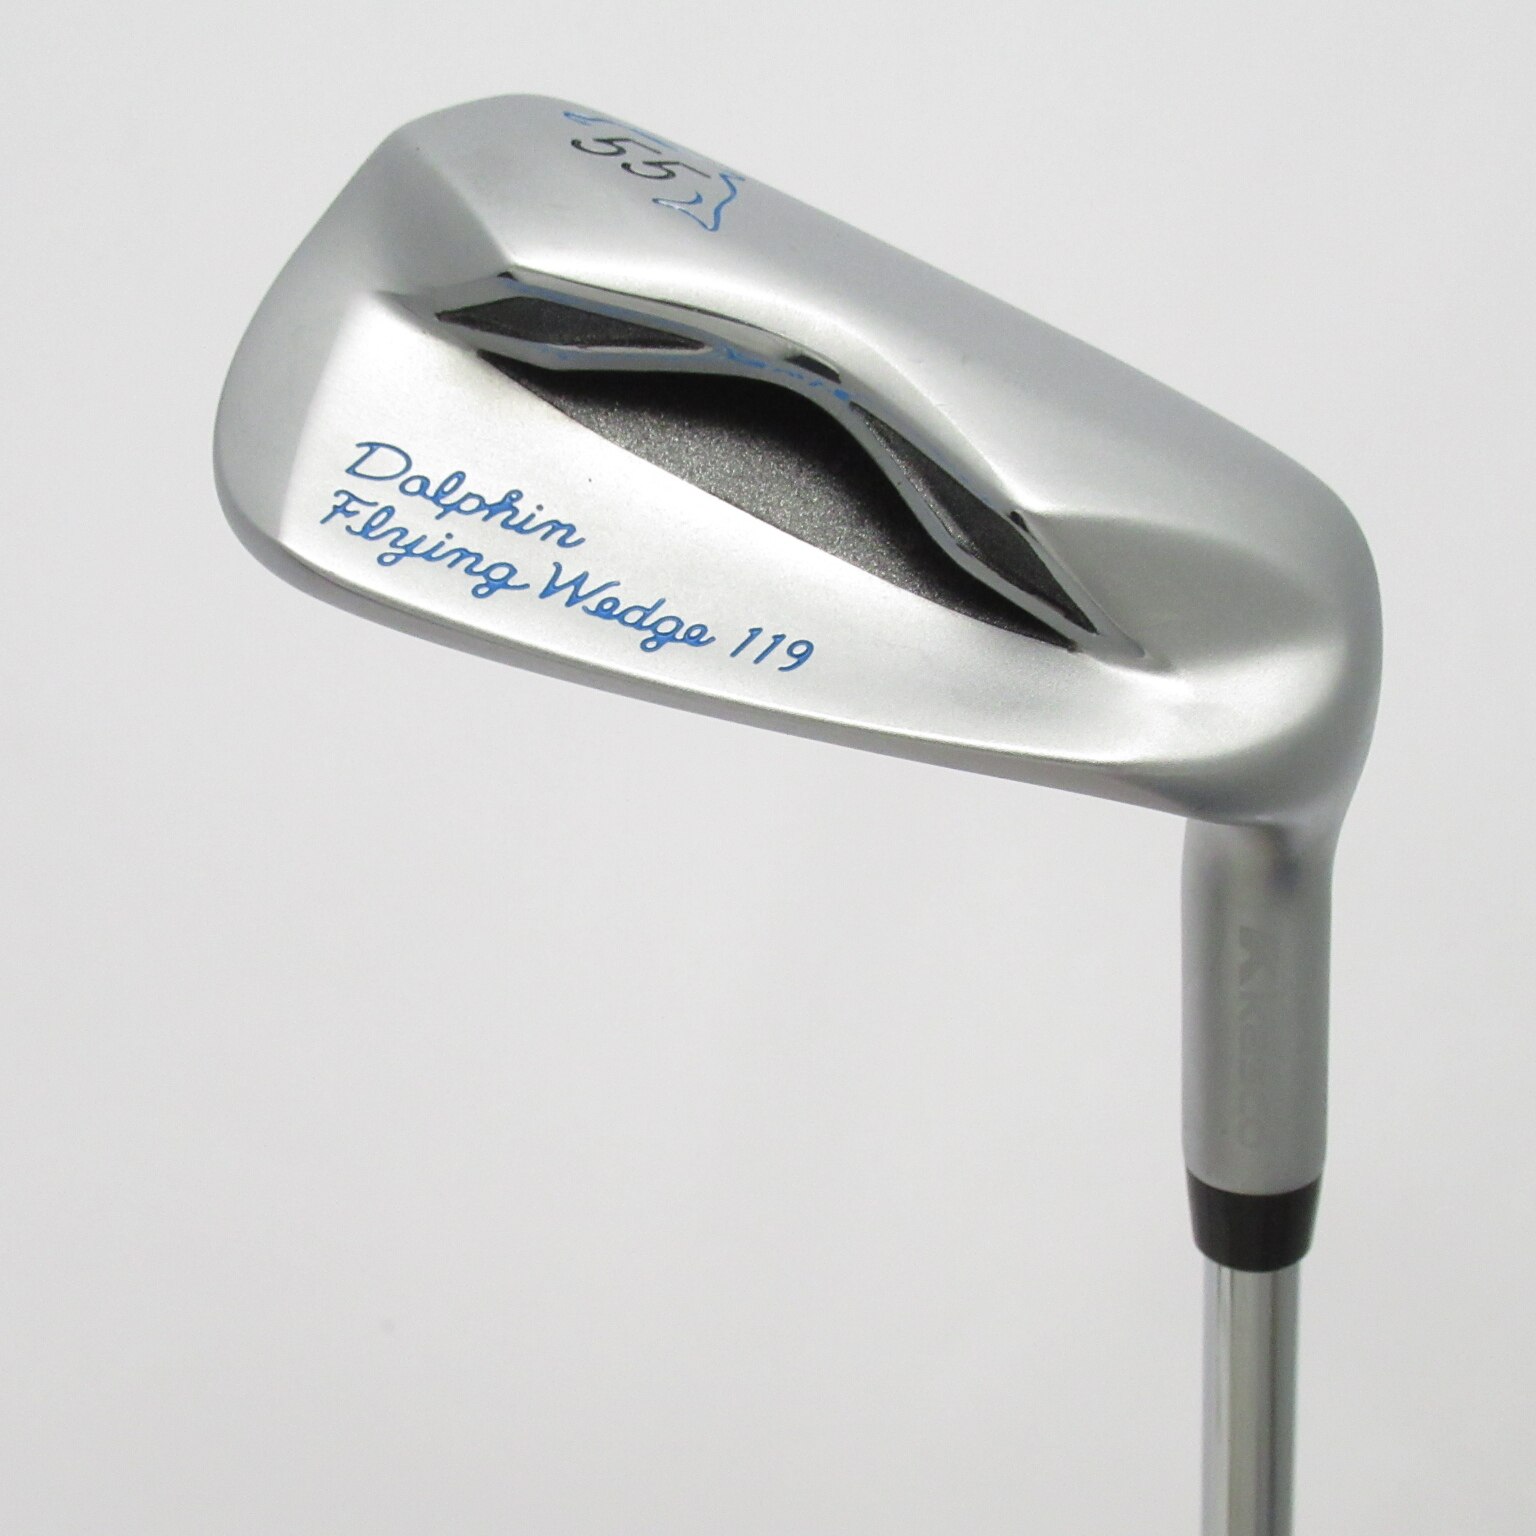 Dolphin　Flying　Wedge　119　55°　スチールシャフト